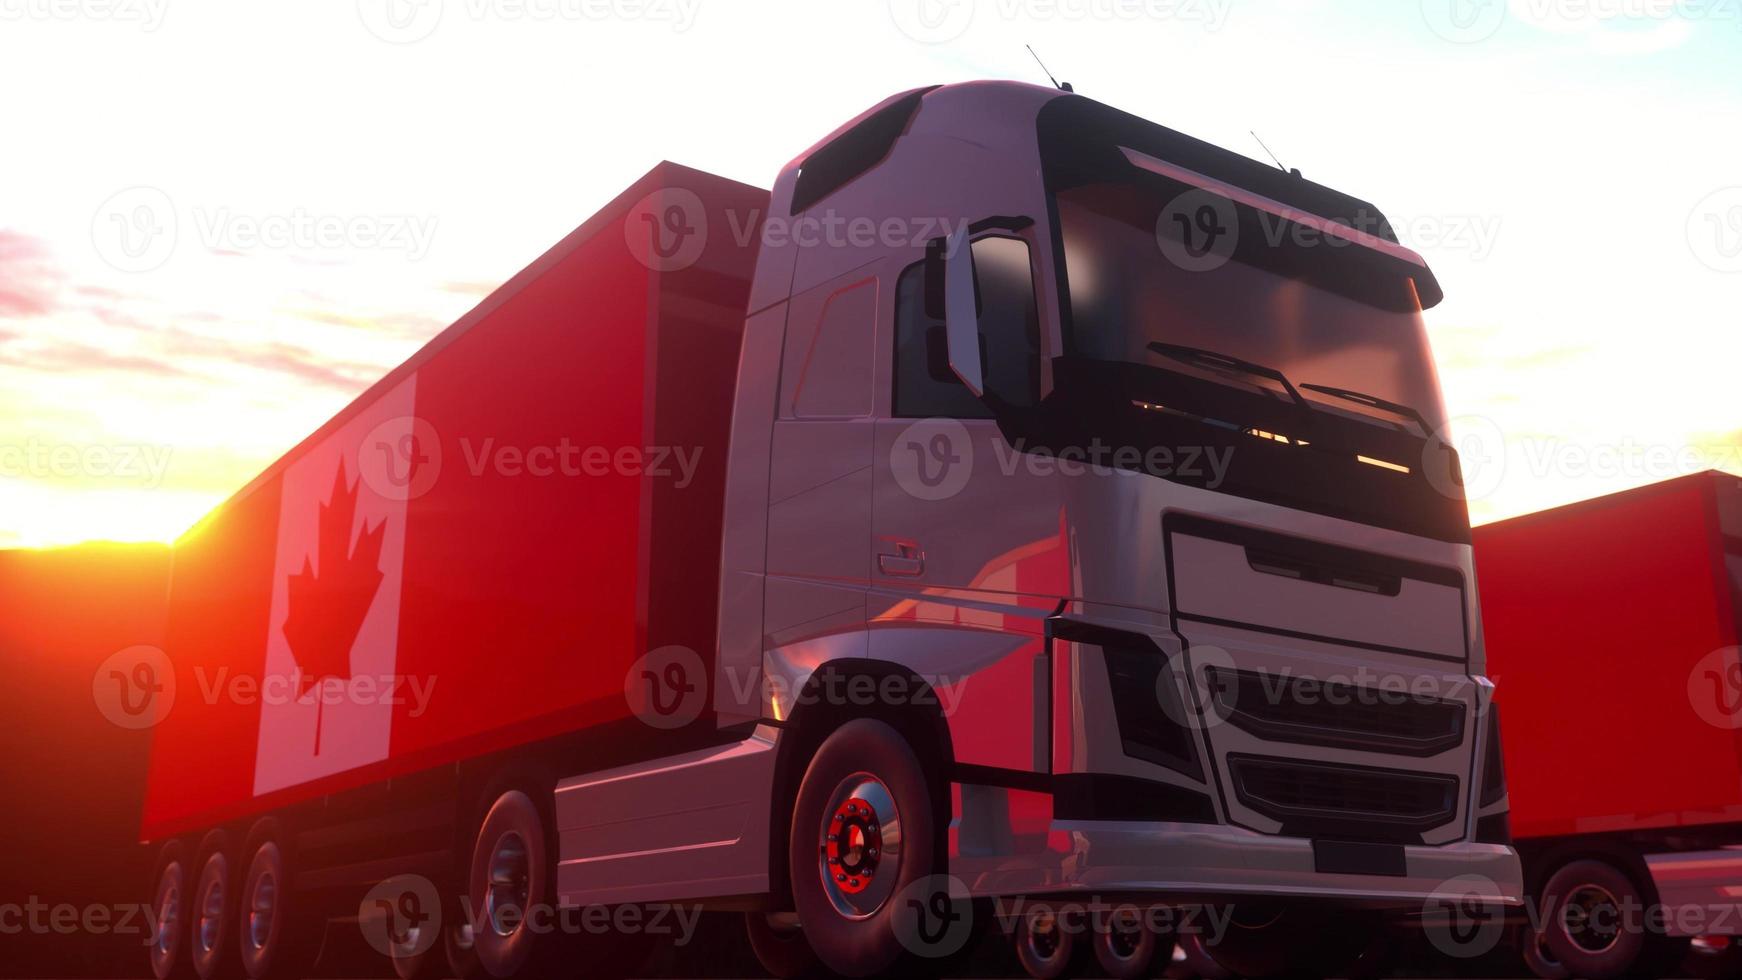 Cargo trucks with Canada flag. Trucks from Canada loading or unloading at warehouse dock. 3d rendering photo